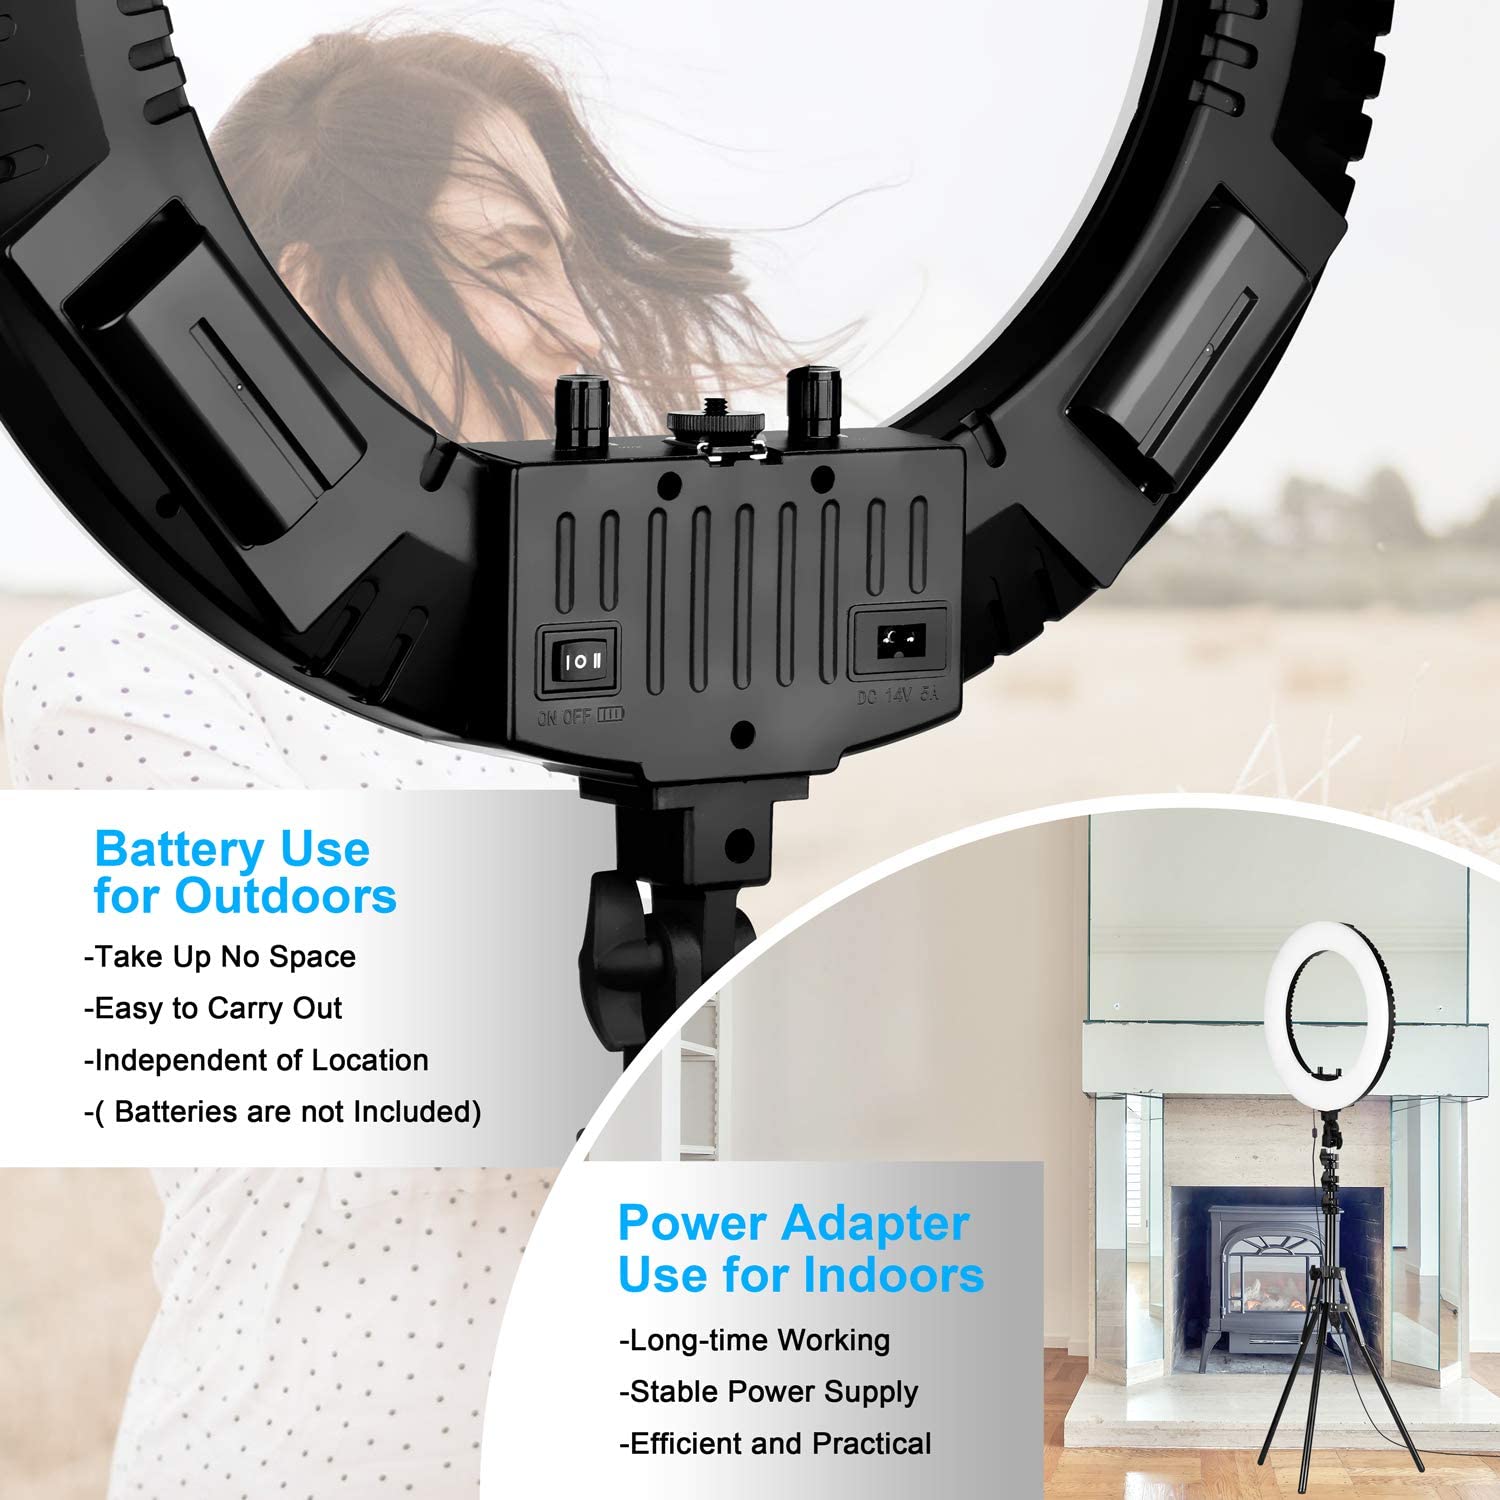 EMART 18inch Ring Light with Light Stand, Bi-Color Temperature and Brightness Adjustment - EMART INTERNATIONAL, INC (Official Website)